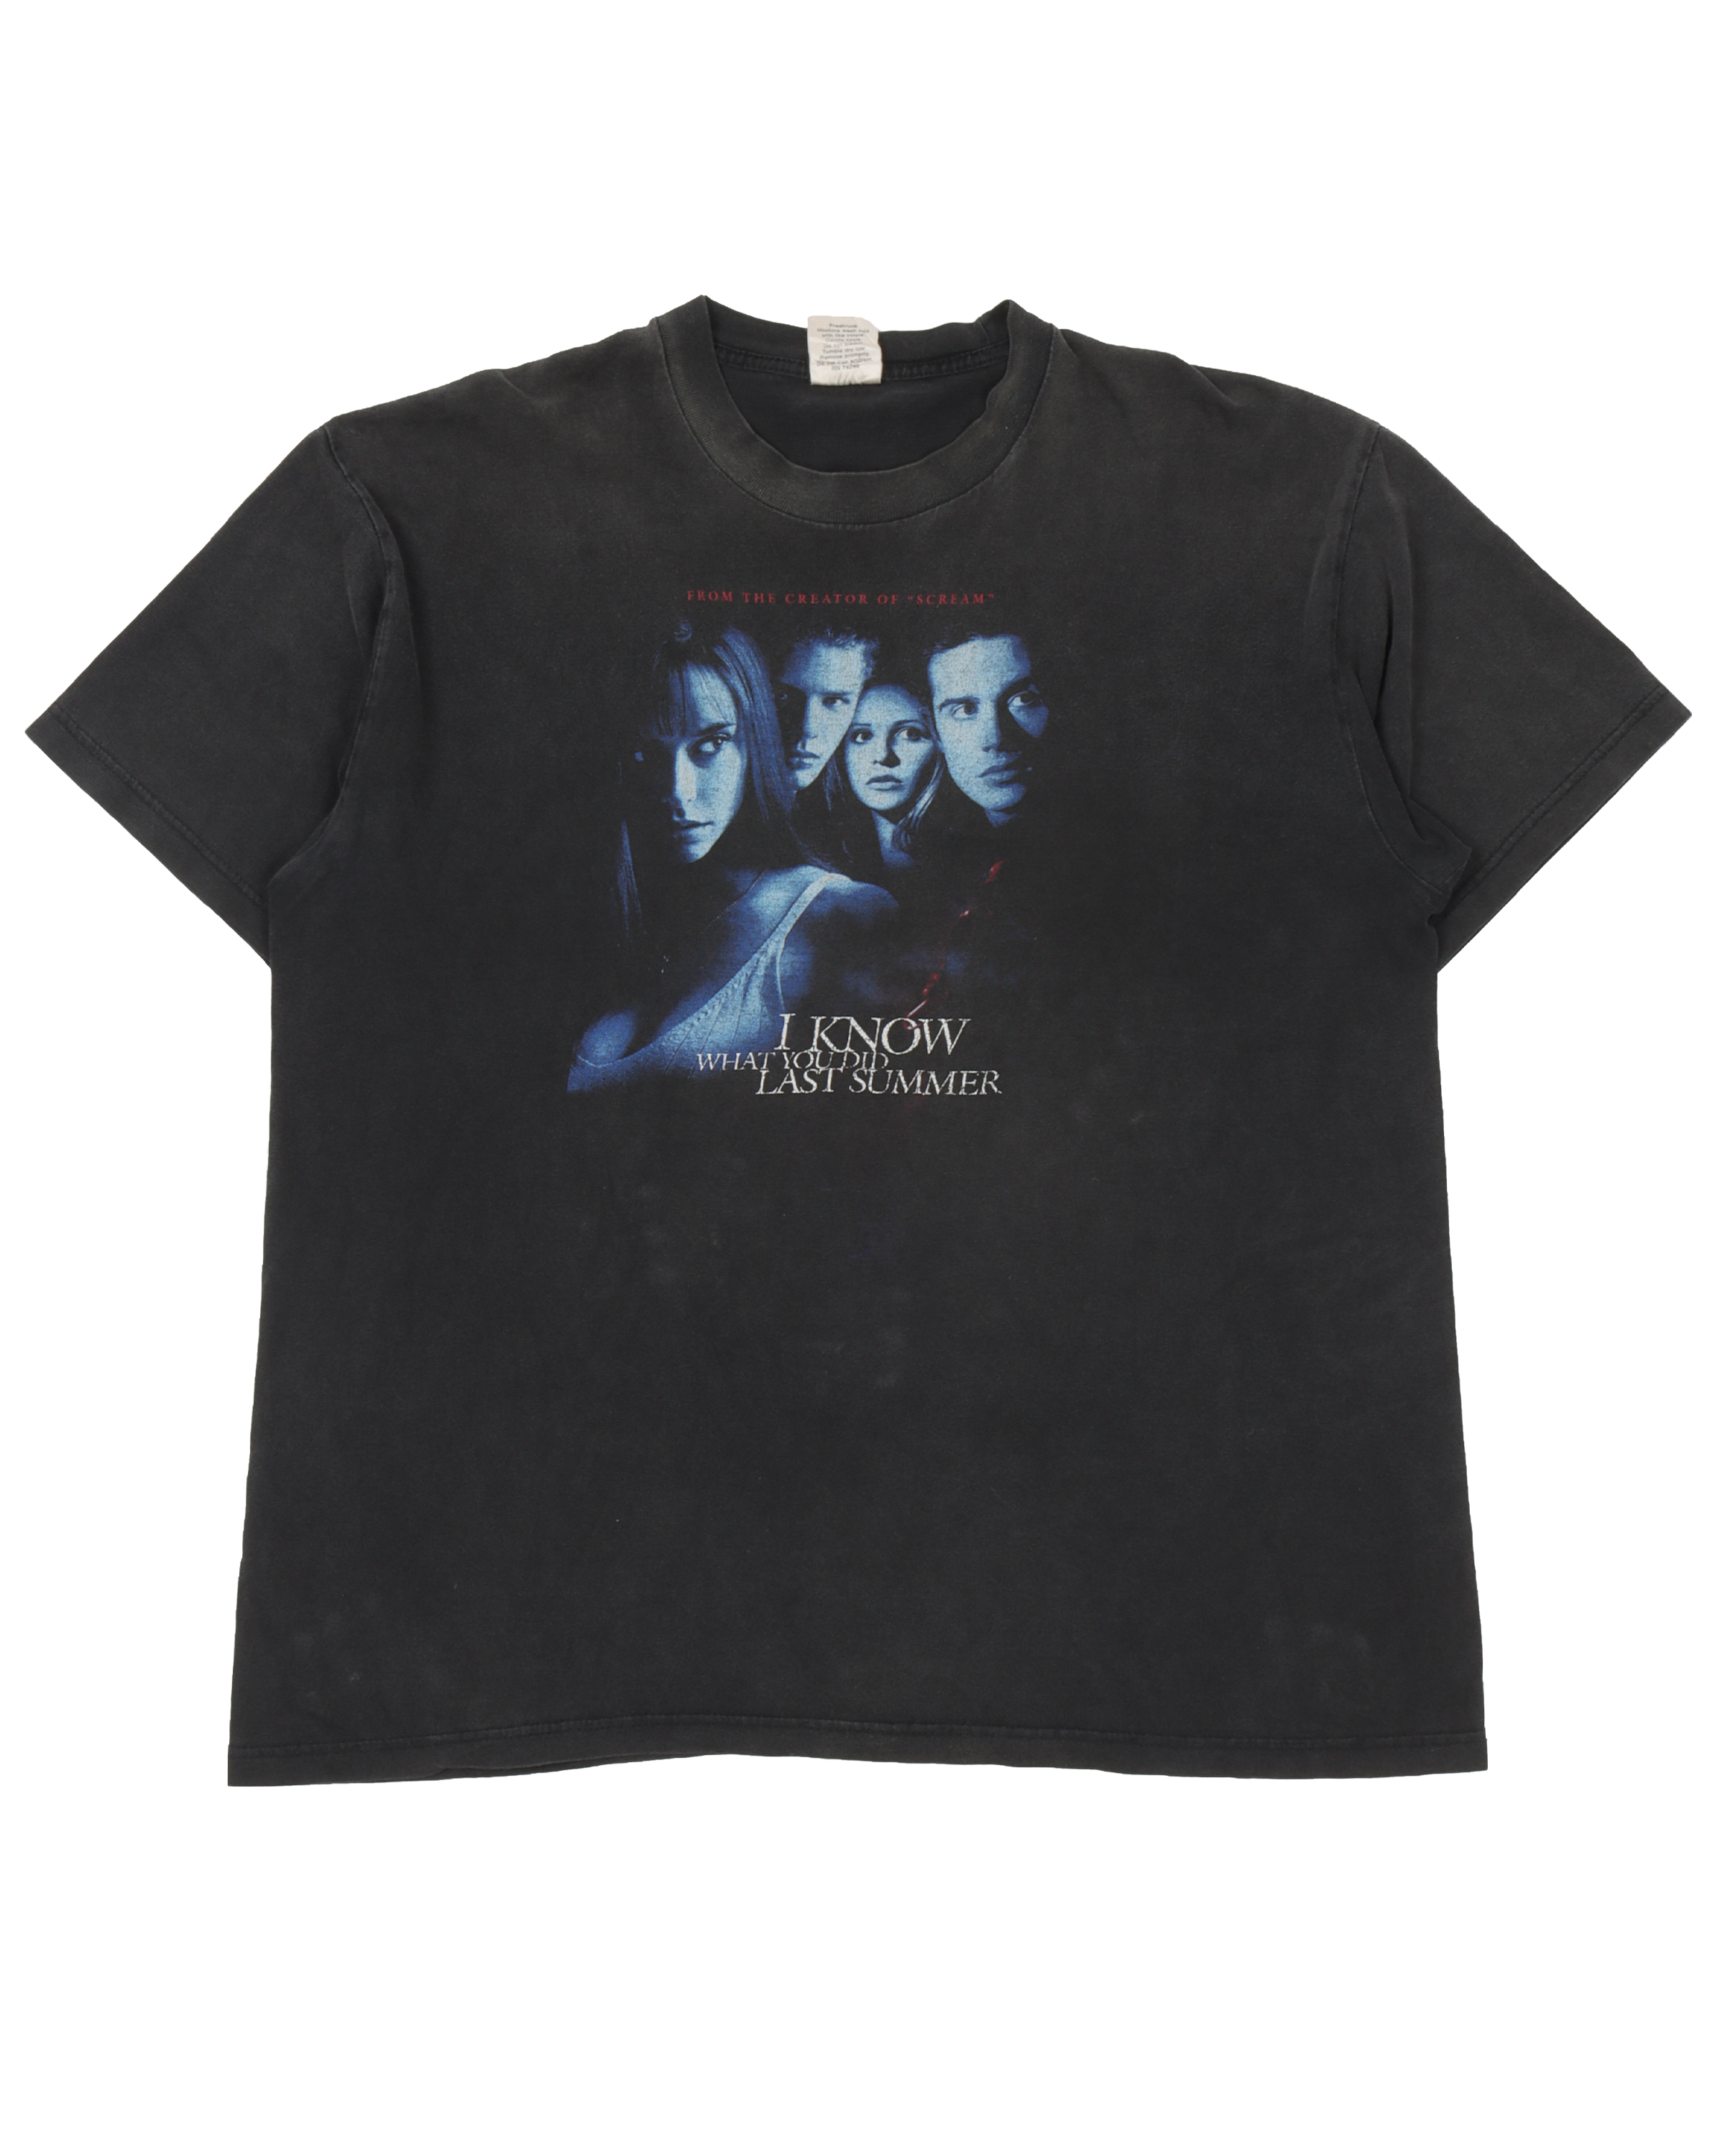 "I Know What You Did Last Summer" Movie Promo T-Shirt